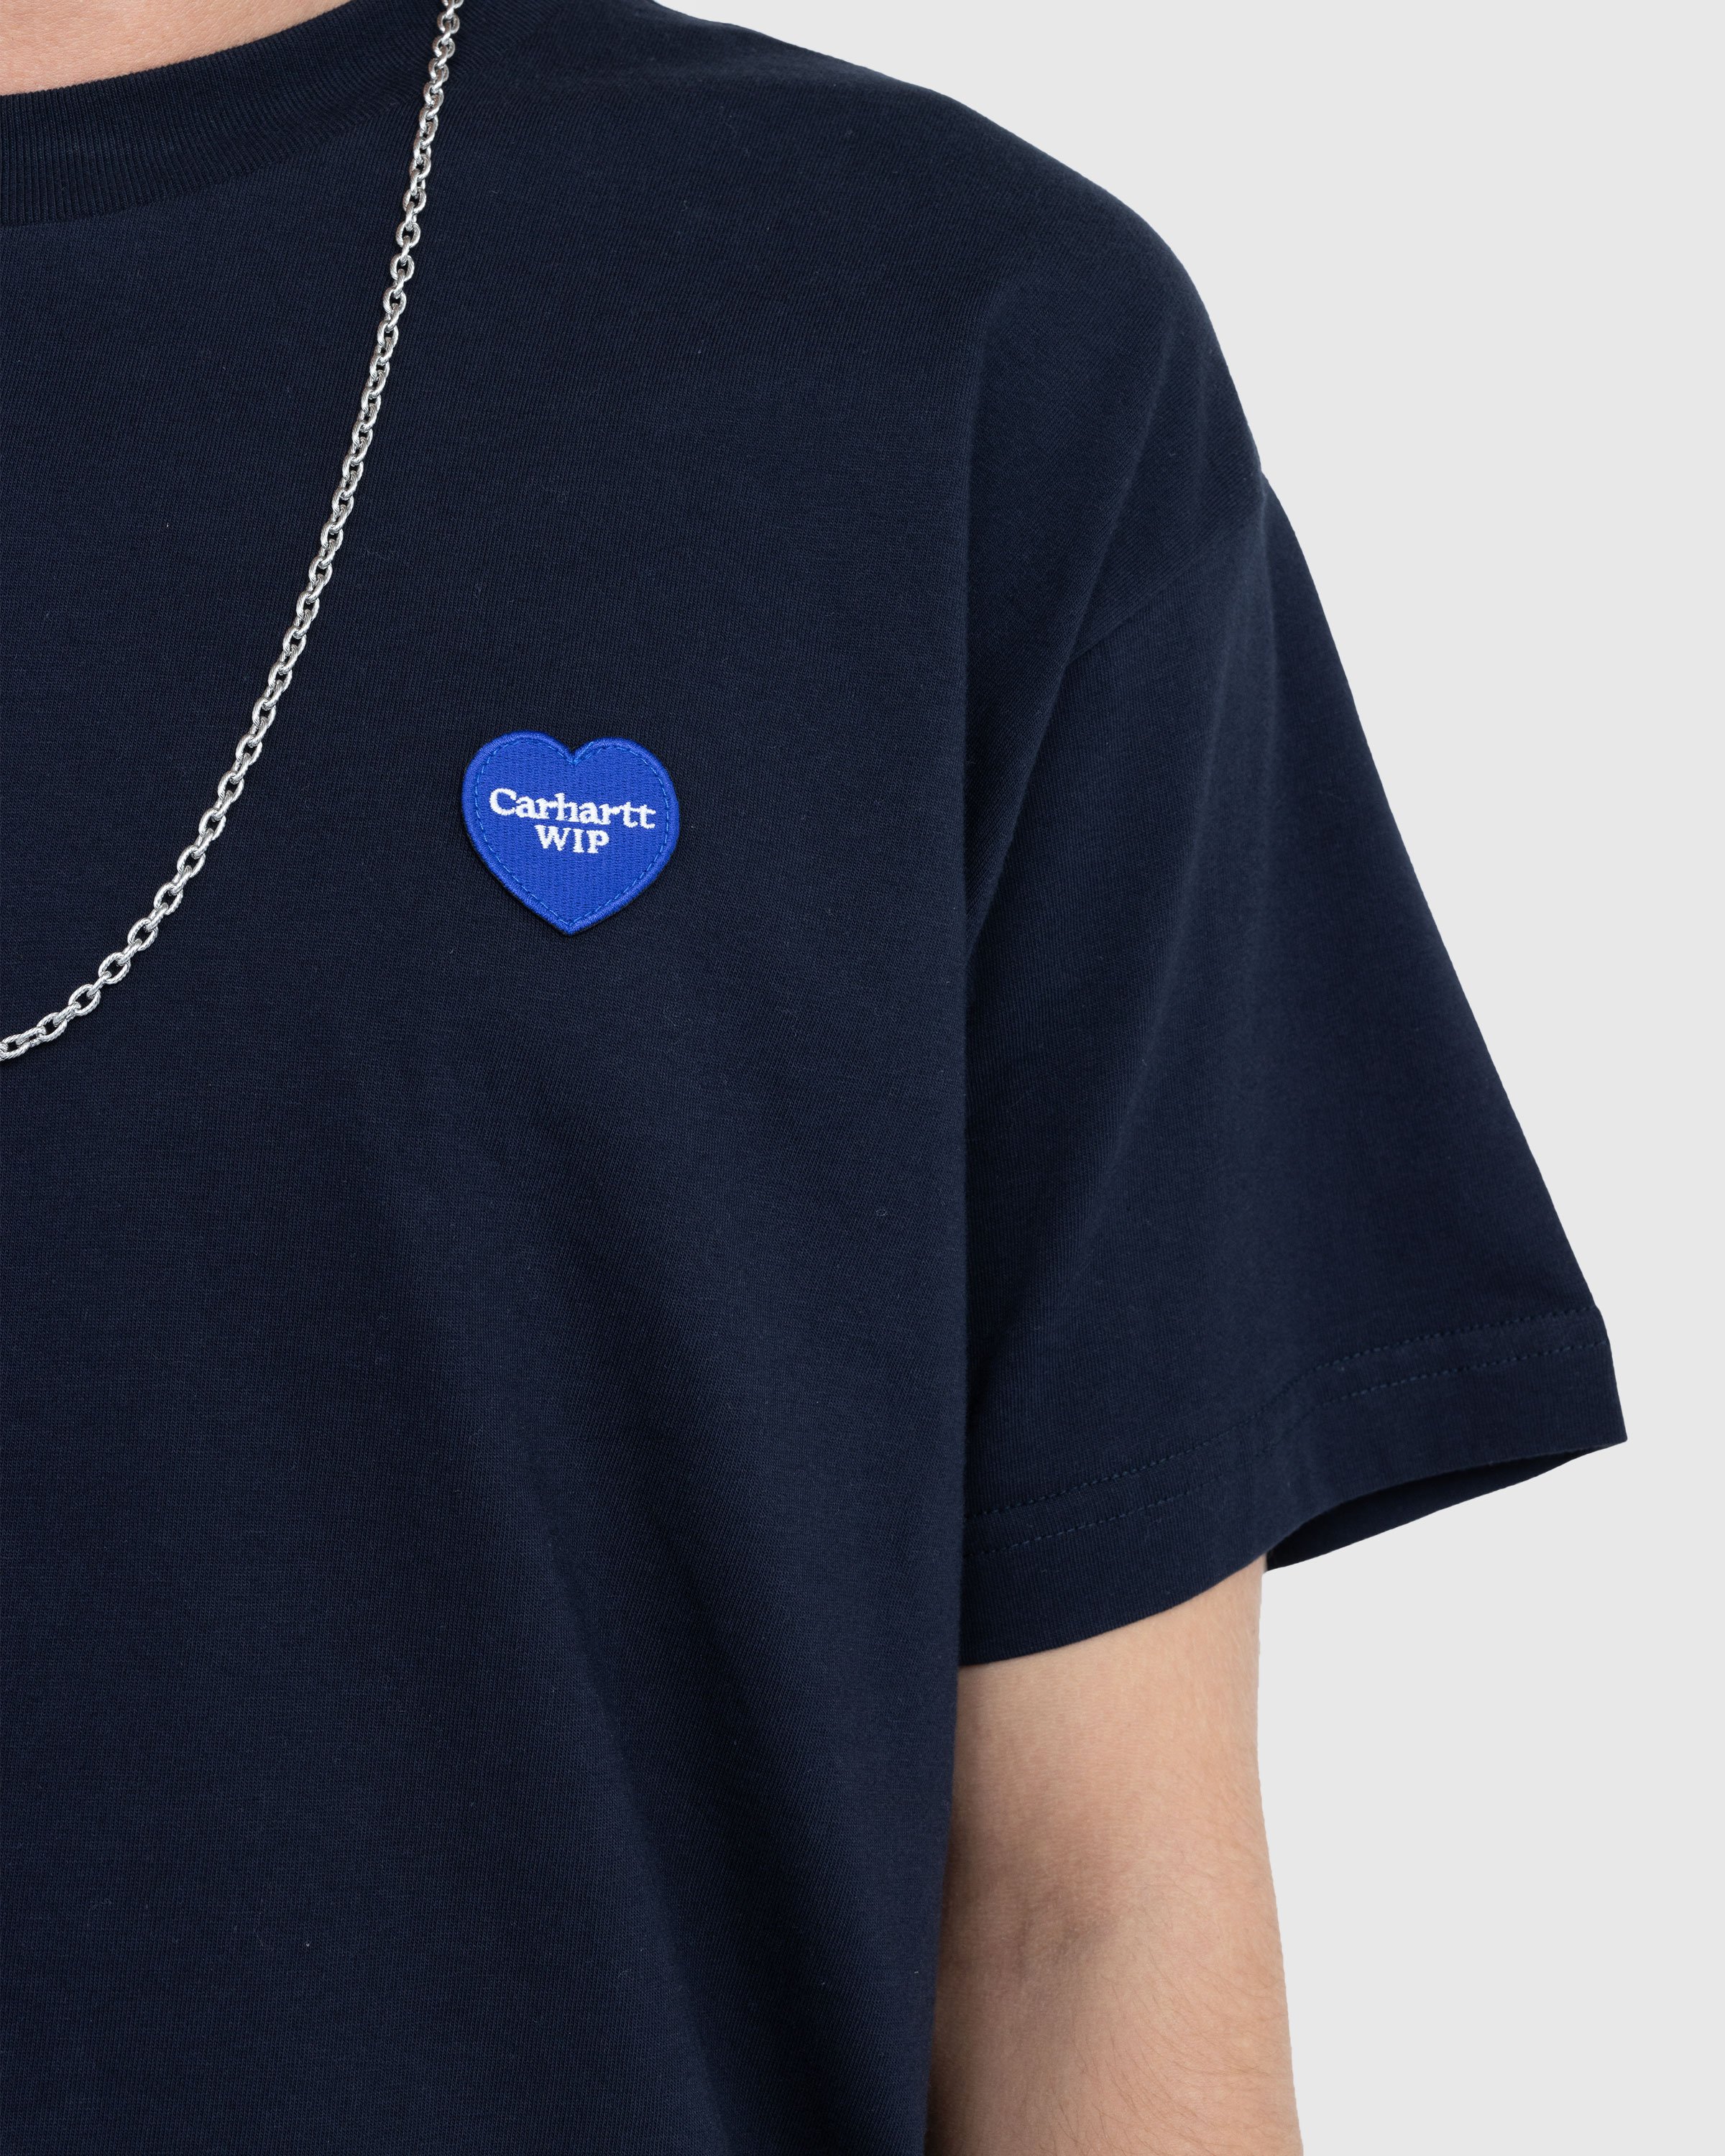 Carhartt WIP - S/S Heart Patch T-Shirt Blue - Clothing - Blue - Image 5